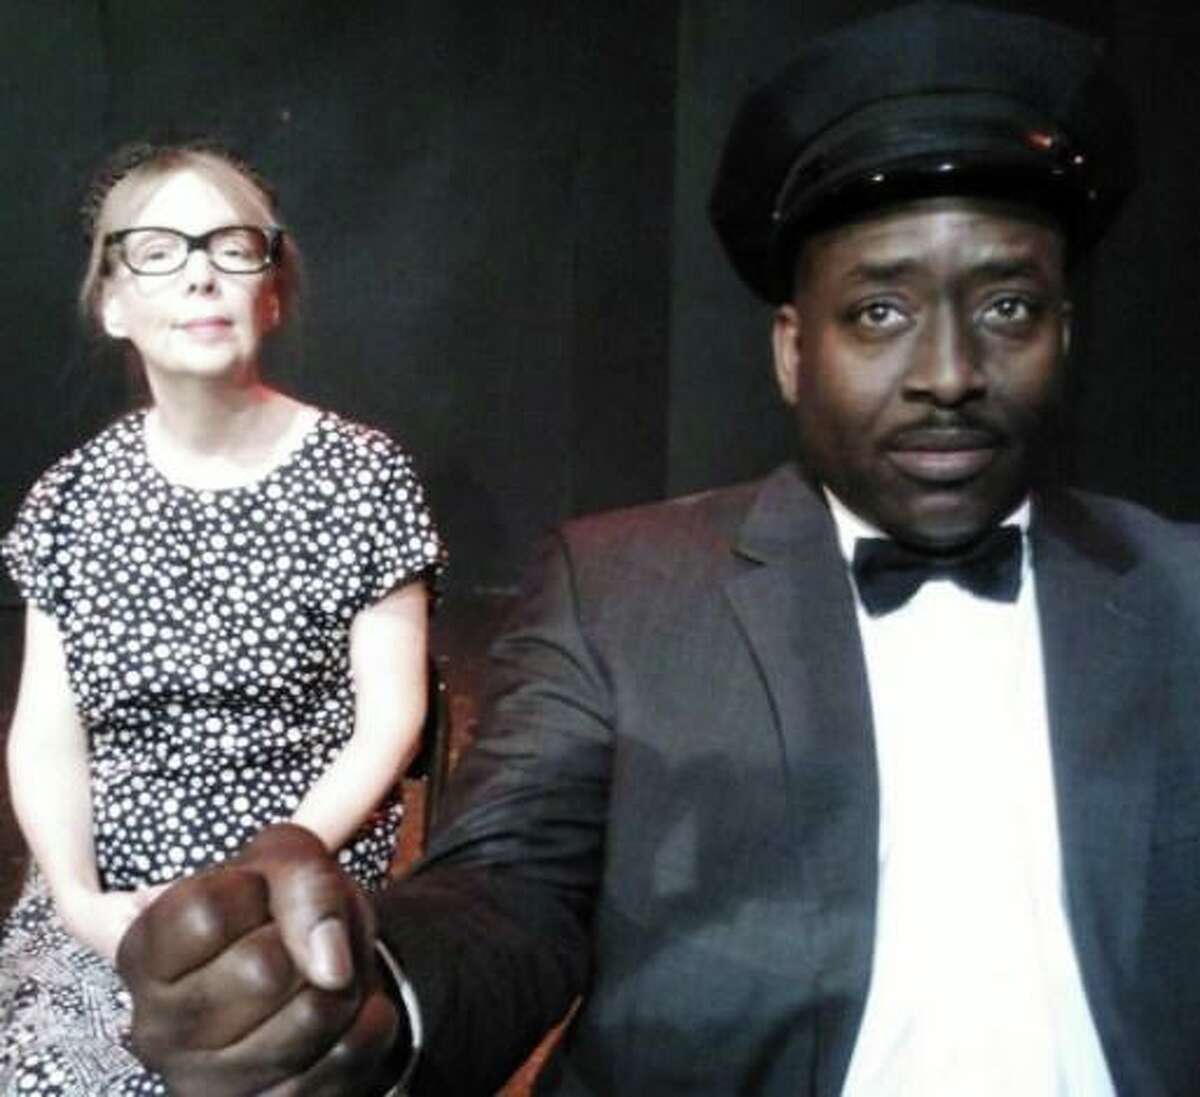 Deborah Basham-Burns, from left, and Keith Wilson starred opposite one another in the 2013 staging of “Driving Miss Daisy” at the Rose Theatre Company.